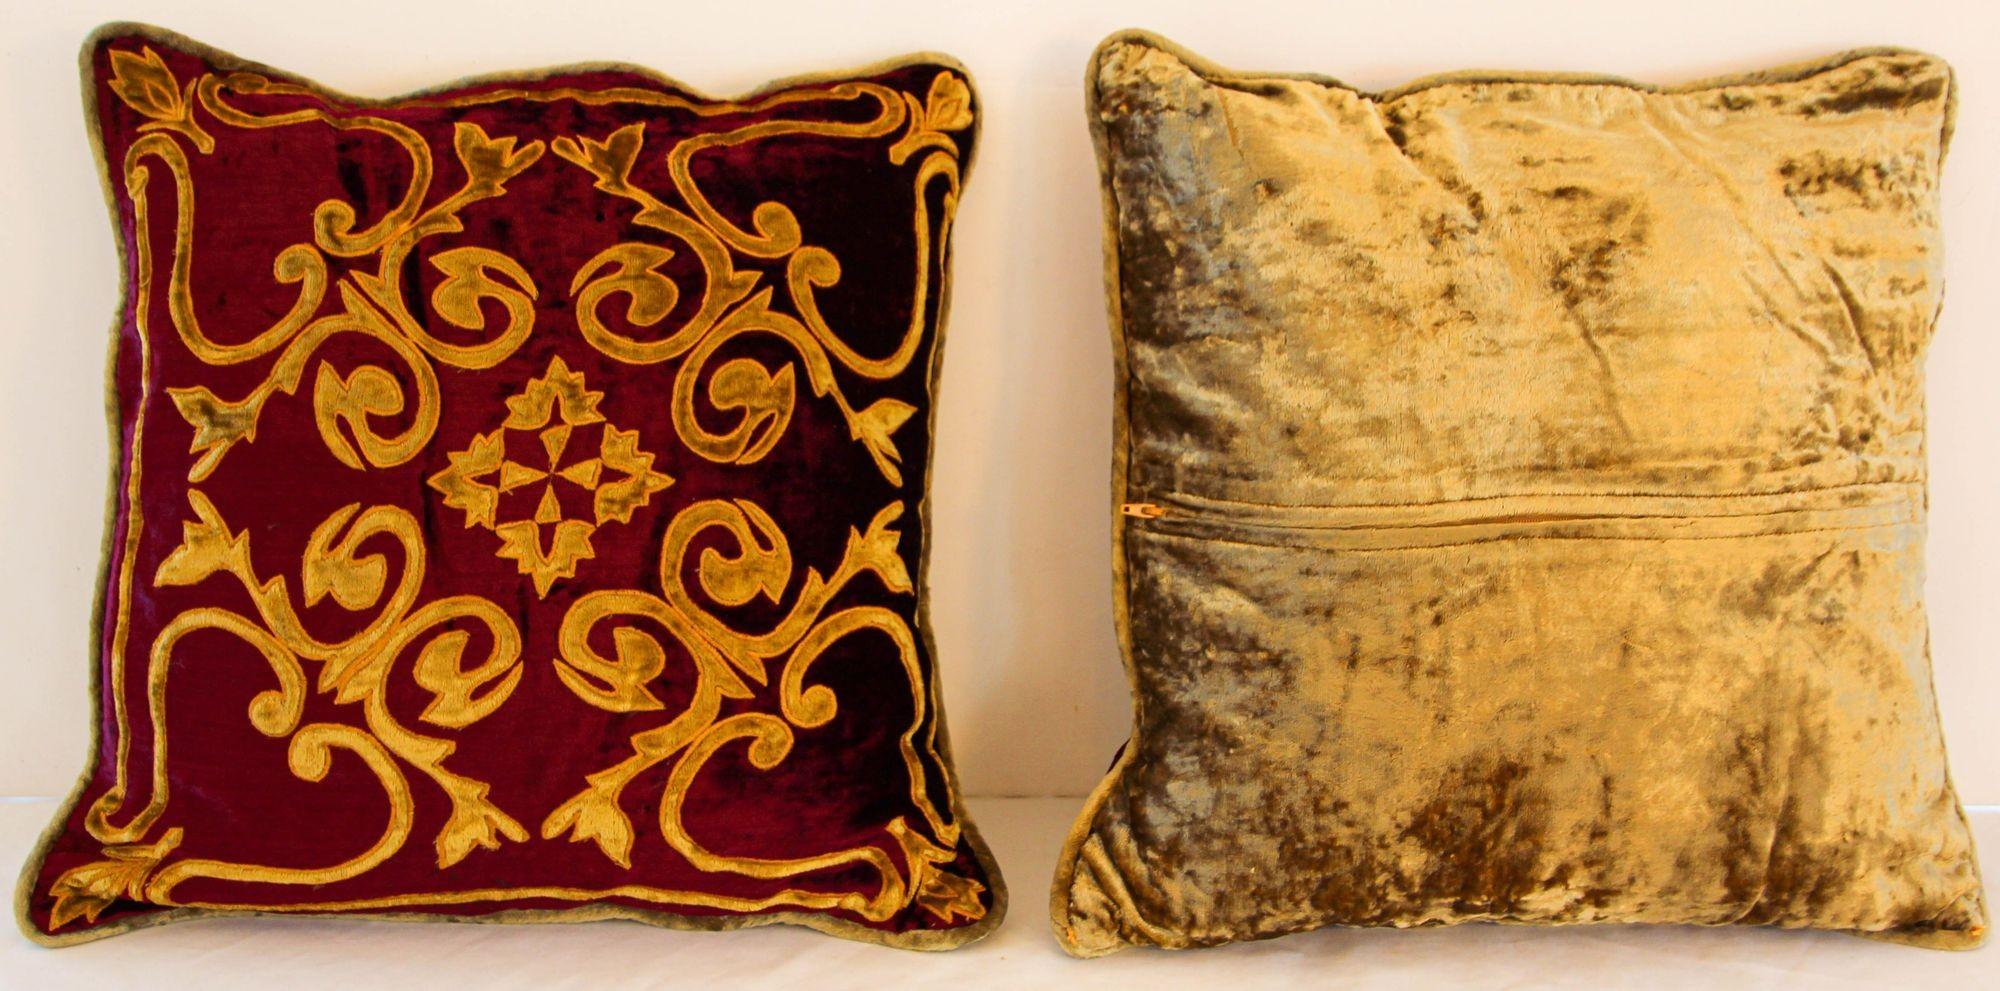 Baroque Style, Red and Gold Velvet Pillow, Elaborate Applique Work.
Venetian silk decorative accent pillows with Baroque Moorish decor in gold velvet applique in front of the pillow.
Red burgundy and gold silk velvet applique with gold velvet